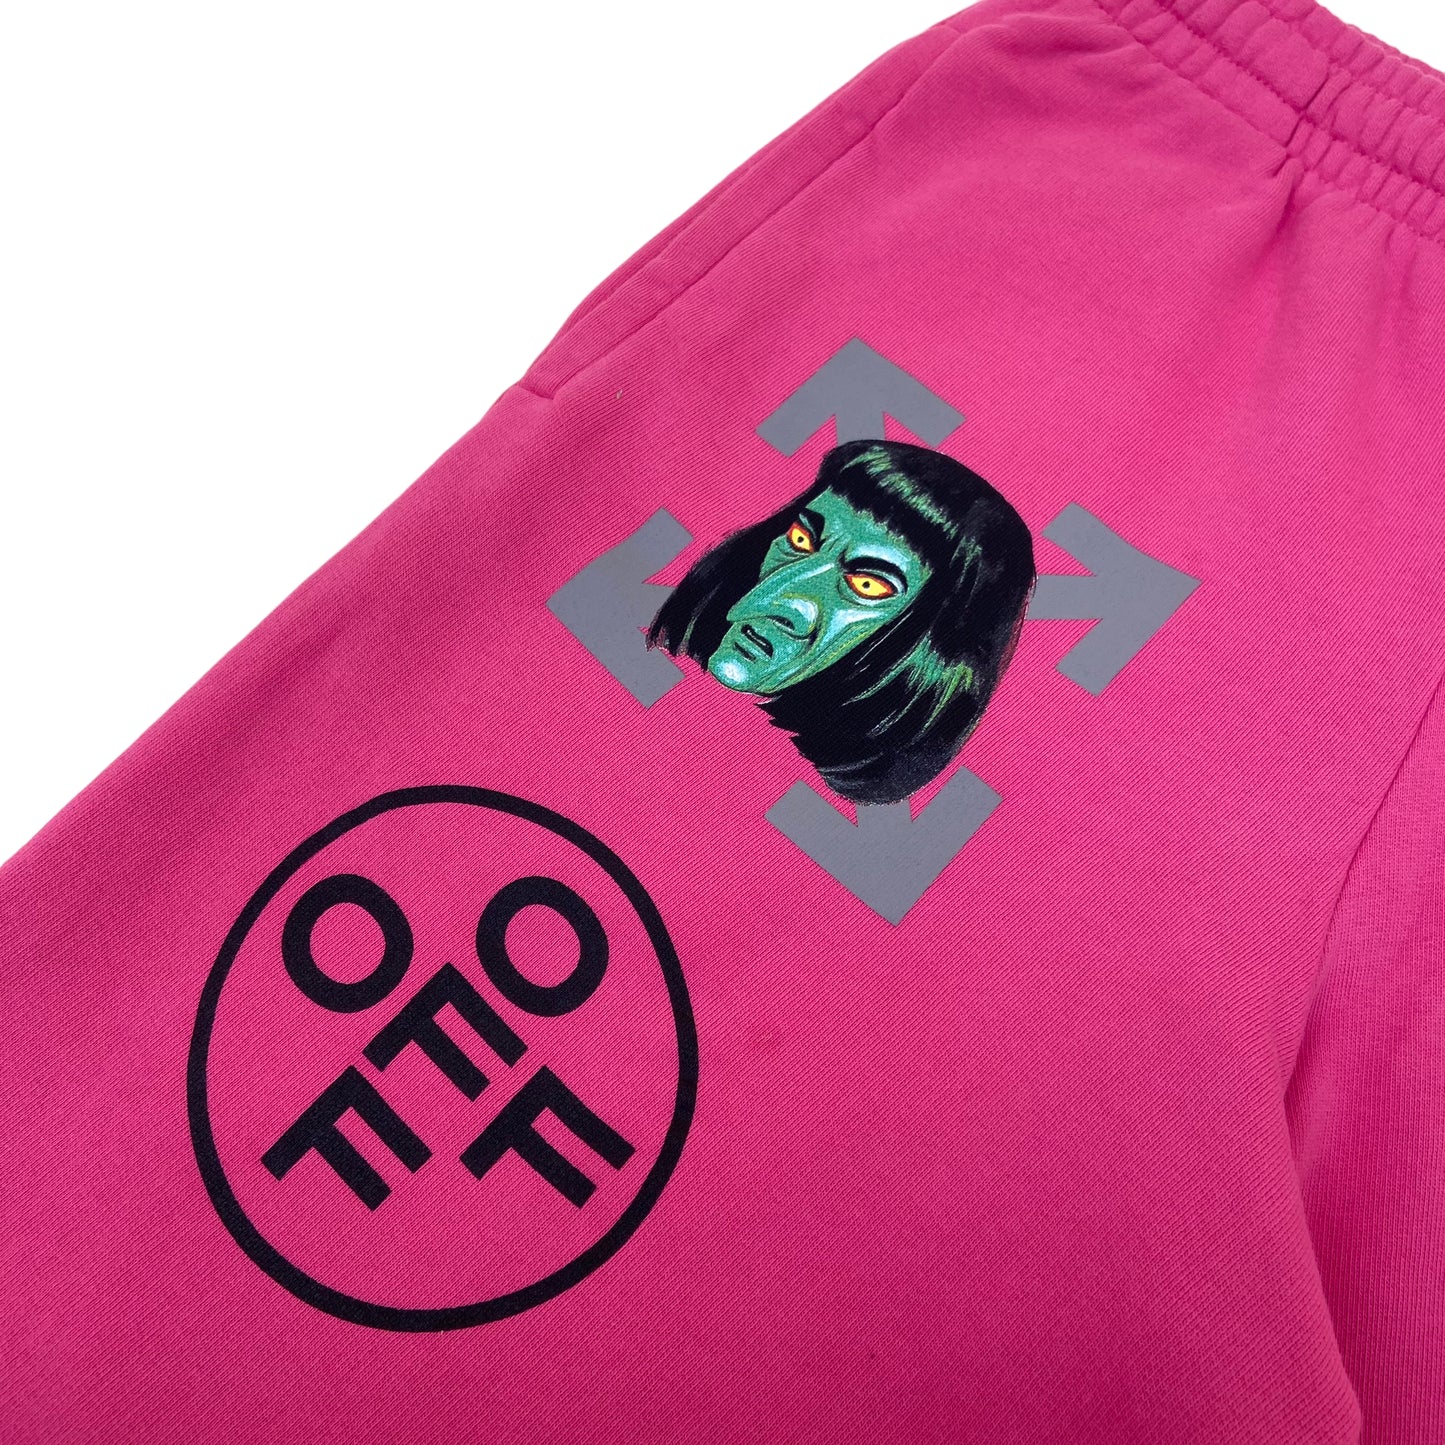 OFF-WHITE SHORTS PINK S